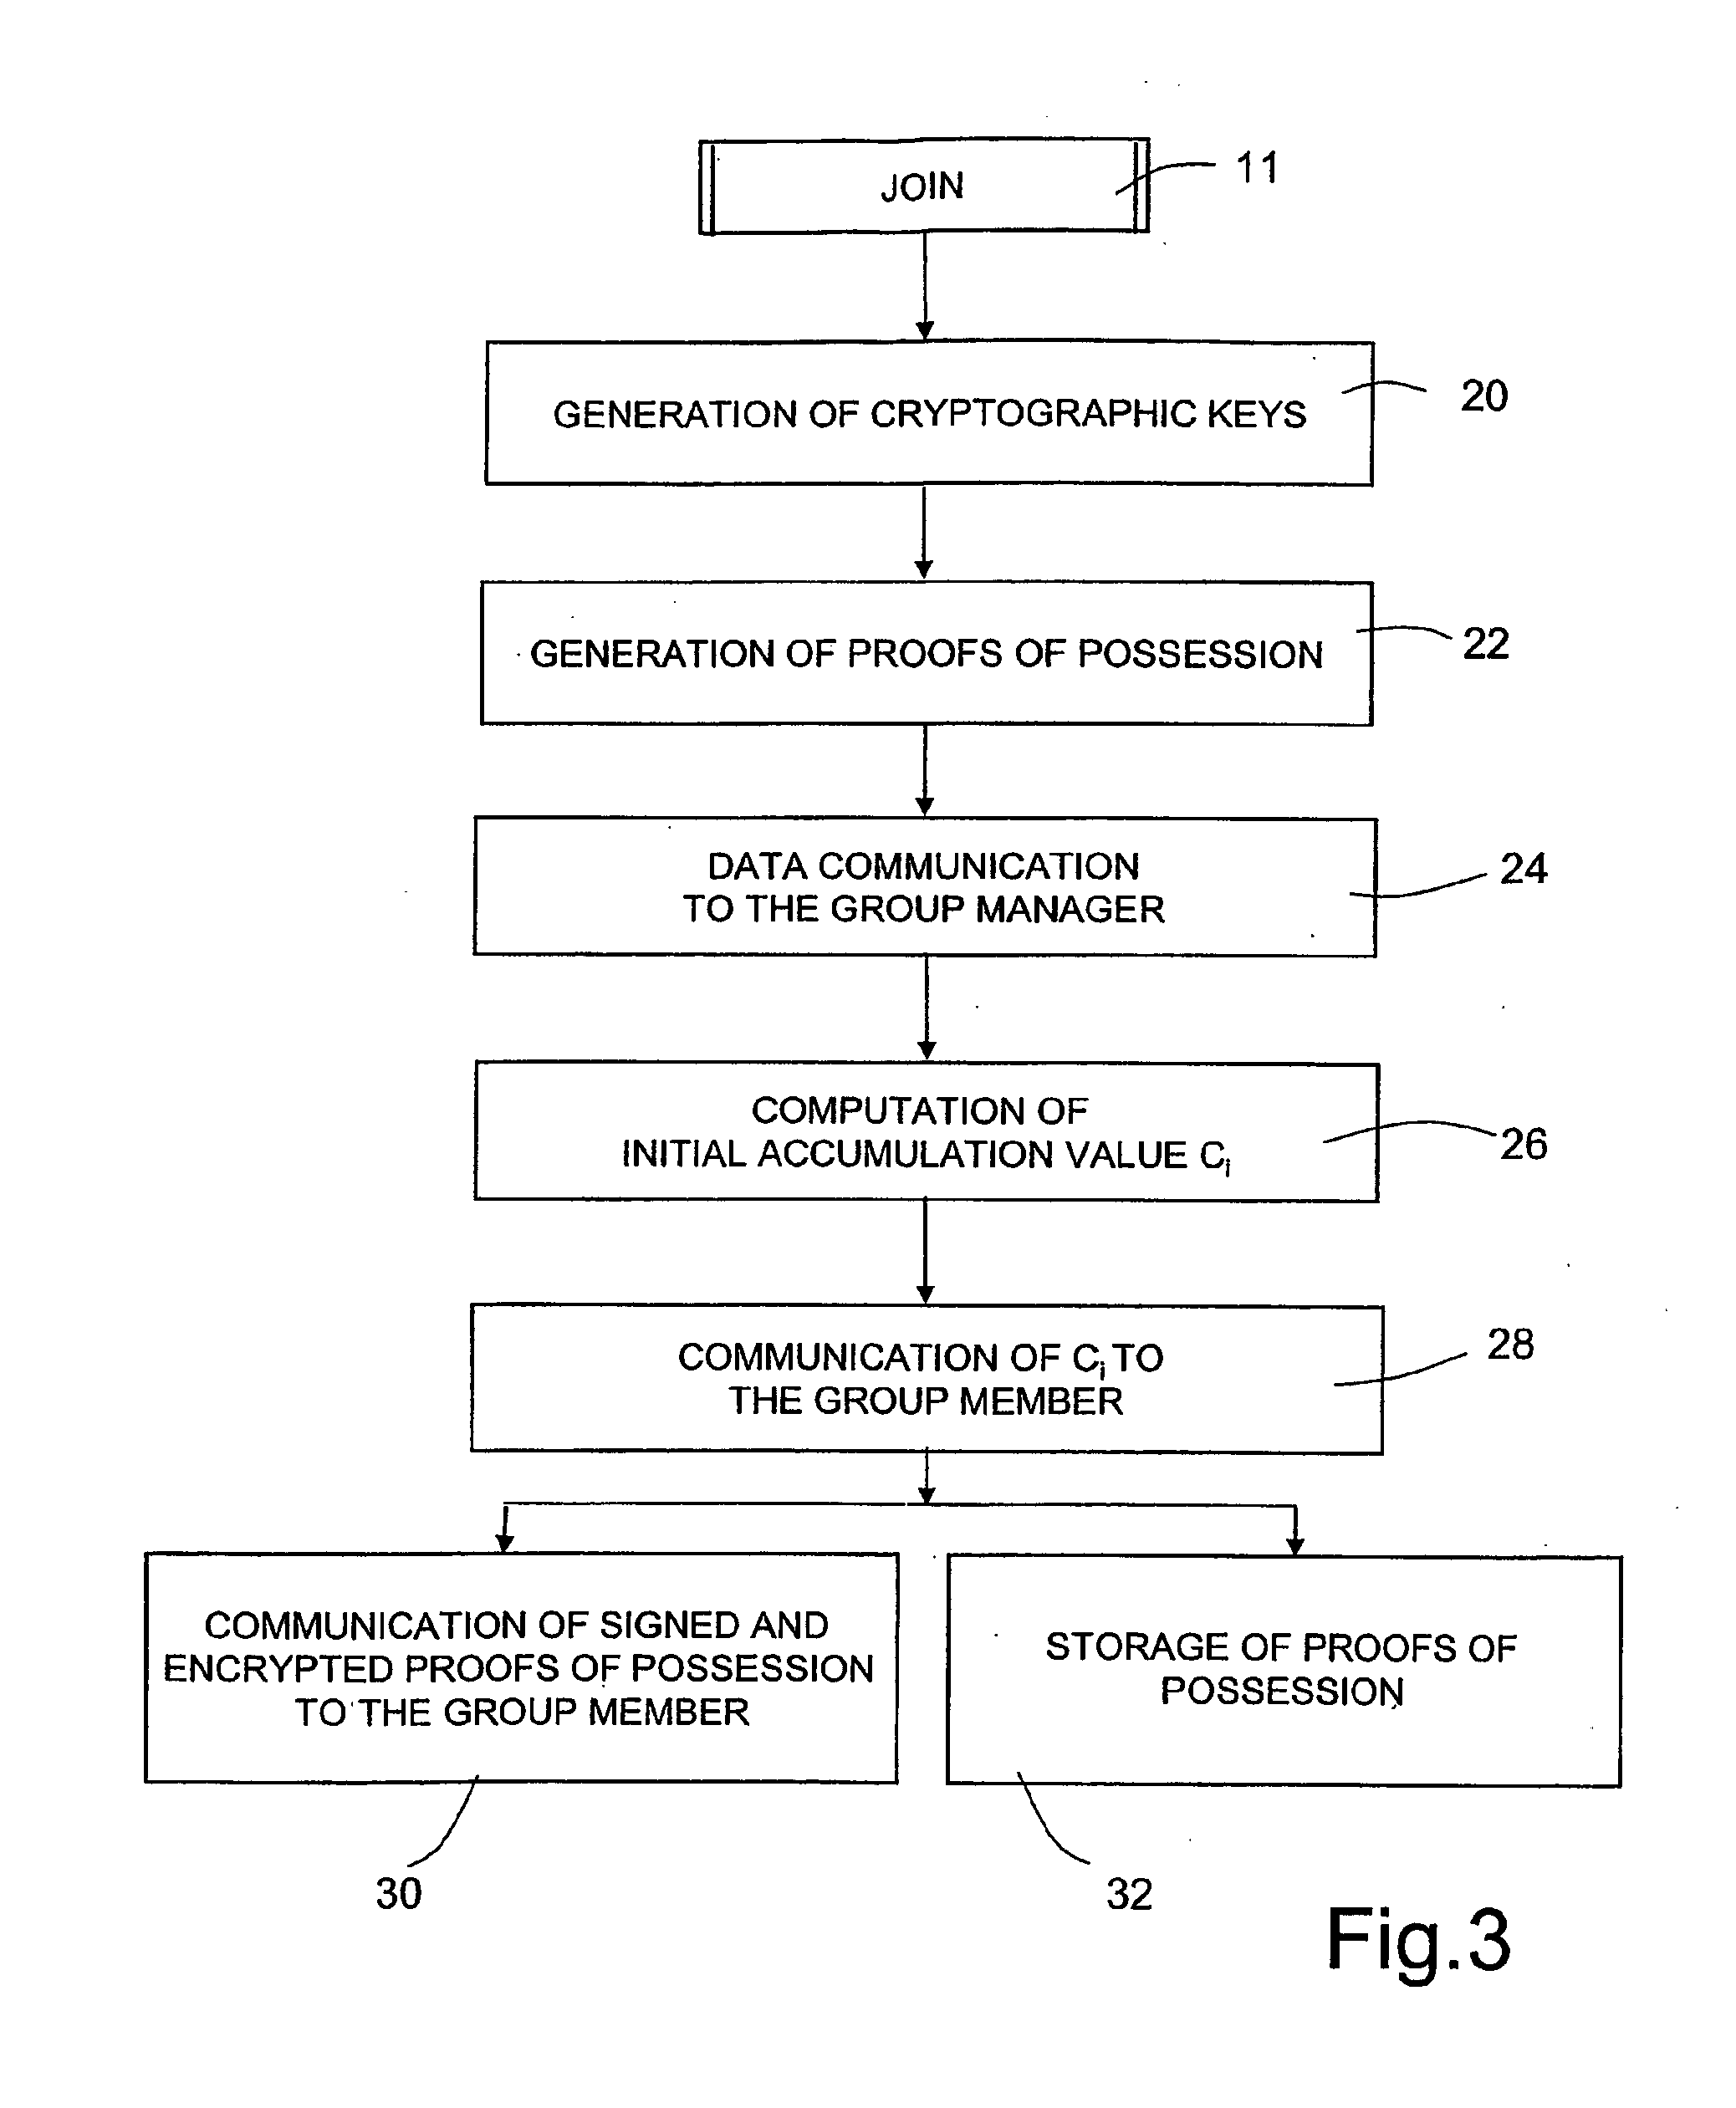 Group Signature Scheme With Improved Efficiency, in Particular in a Join Procedure